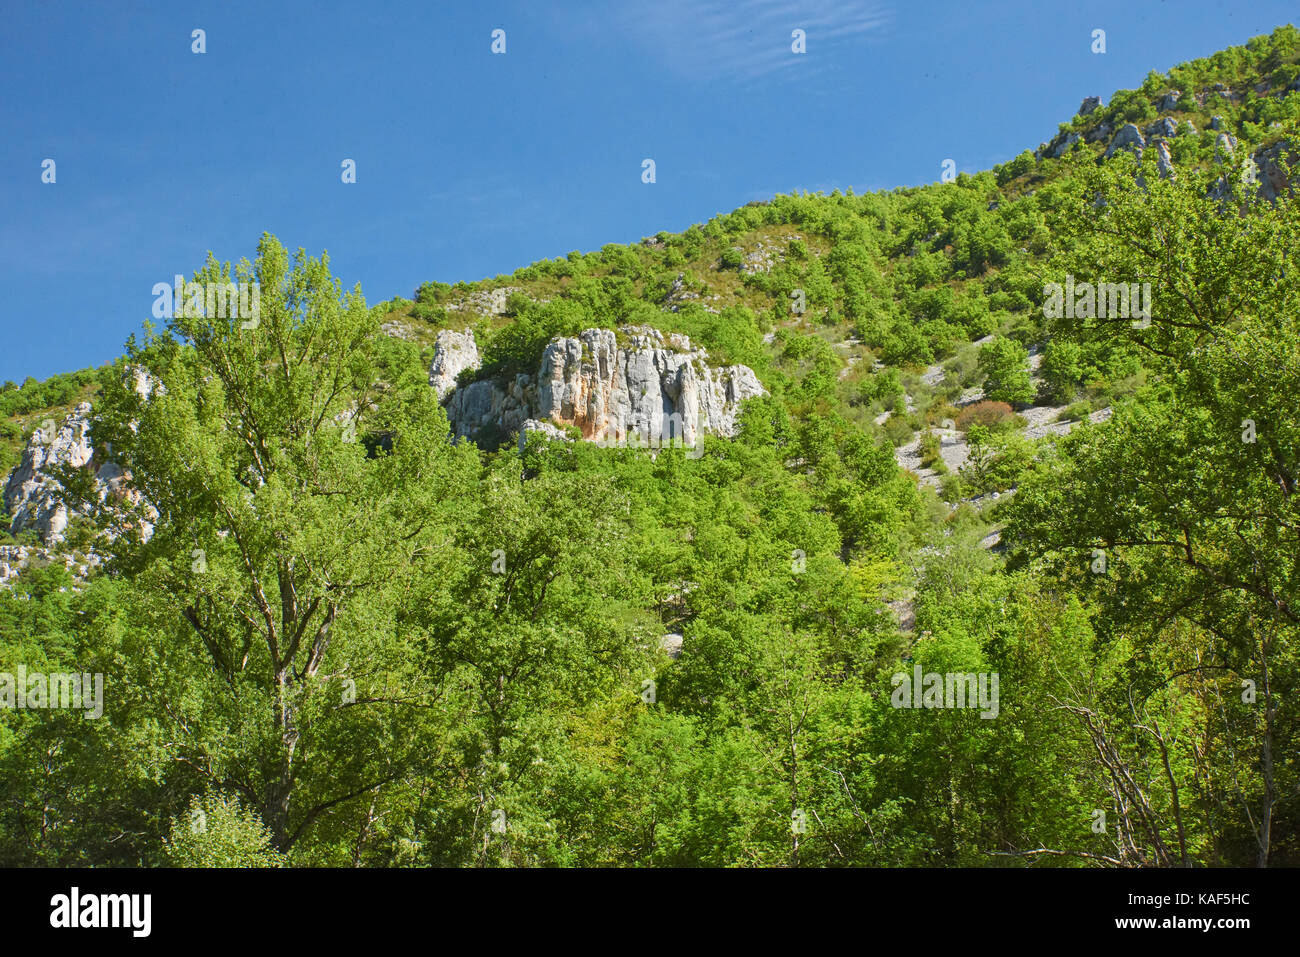 Gorges du Tarn on a boat Stock Photo